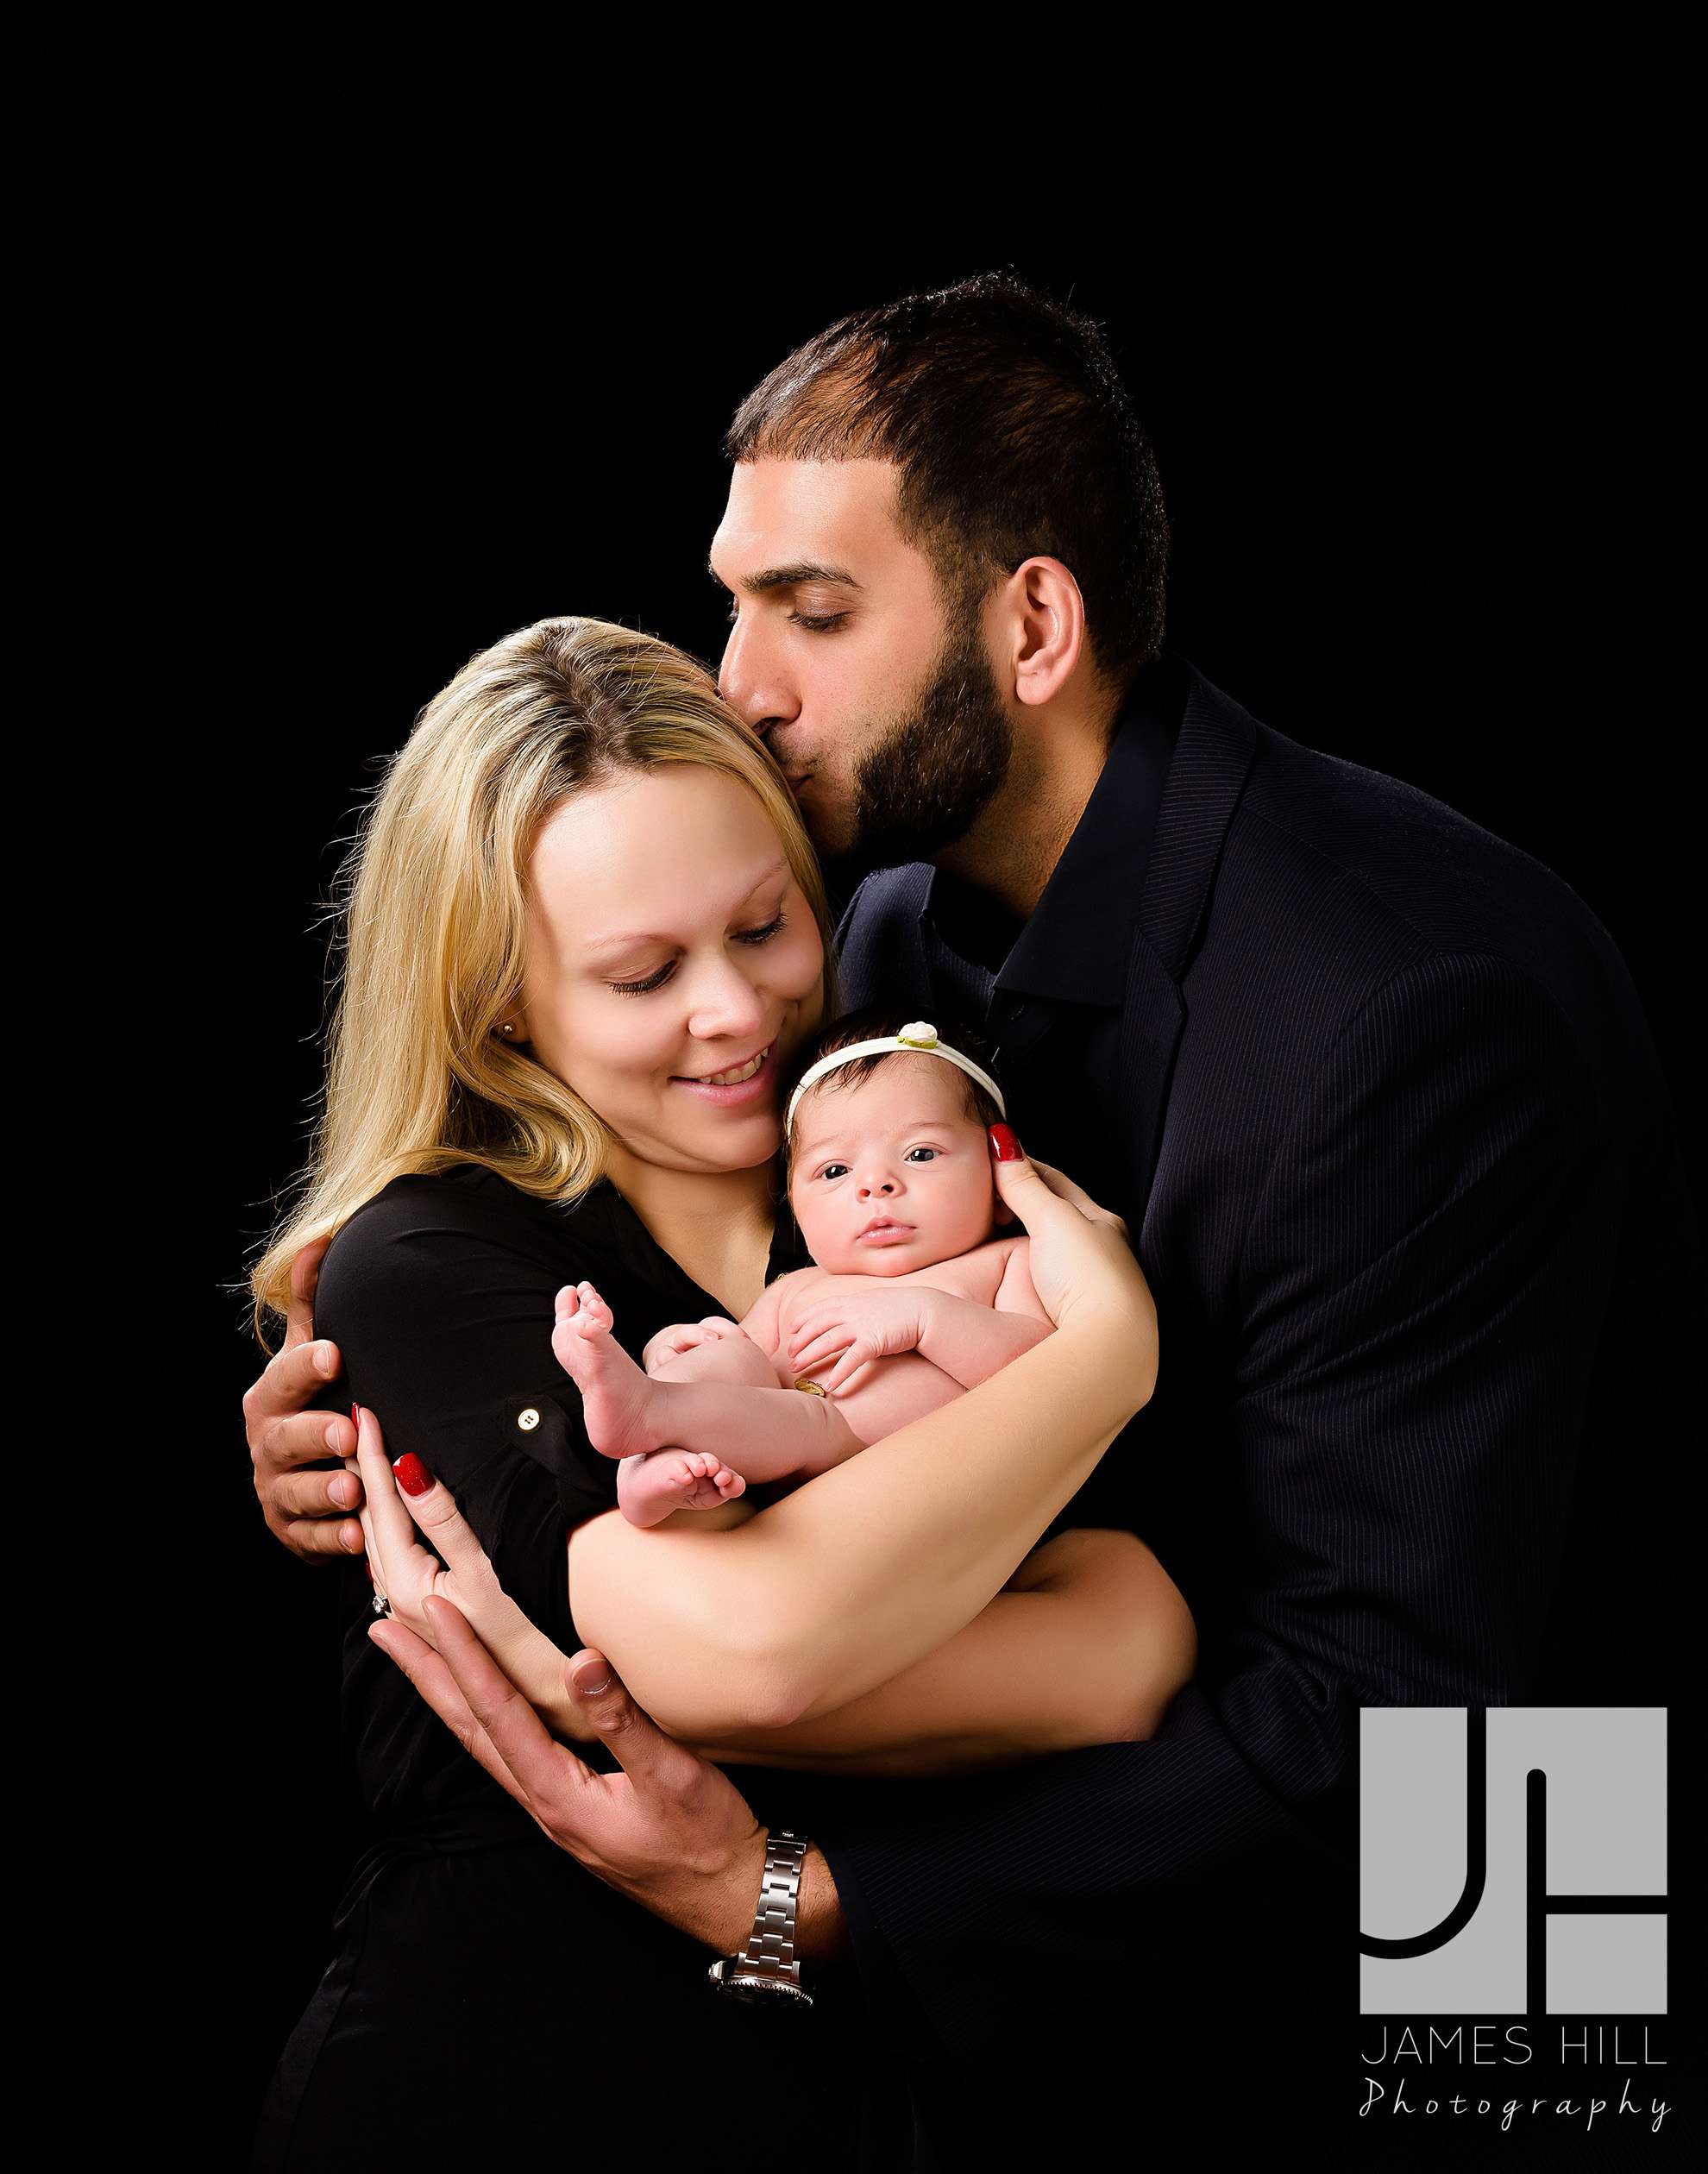 First family portrait for Marleigh and her family